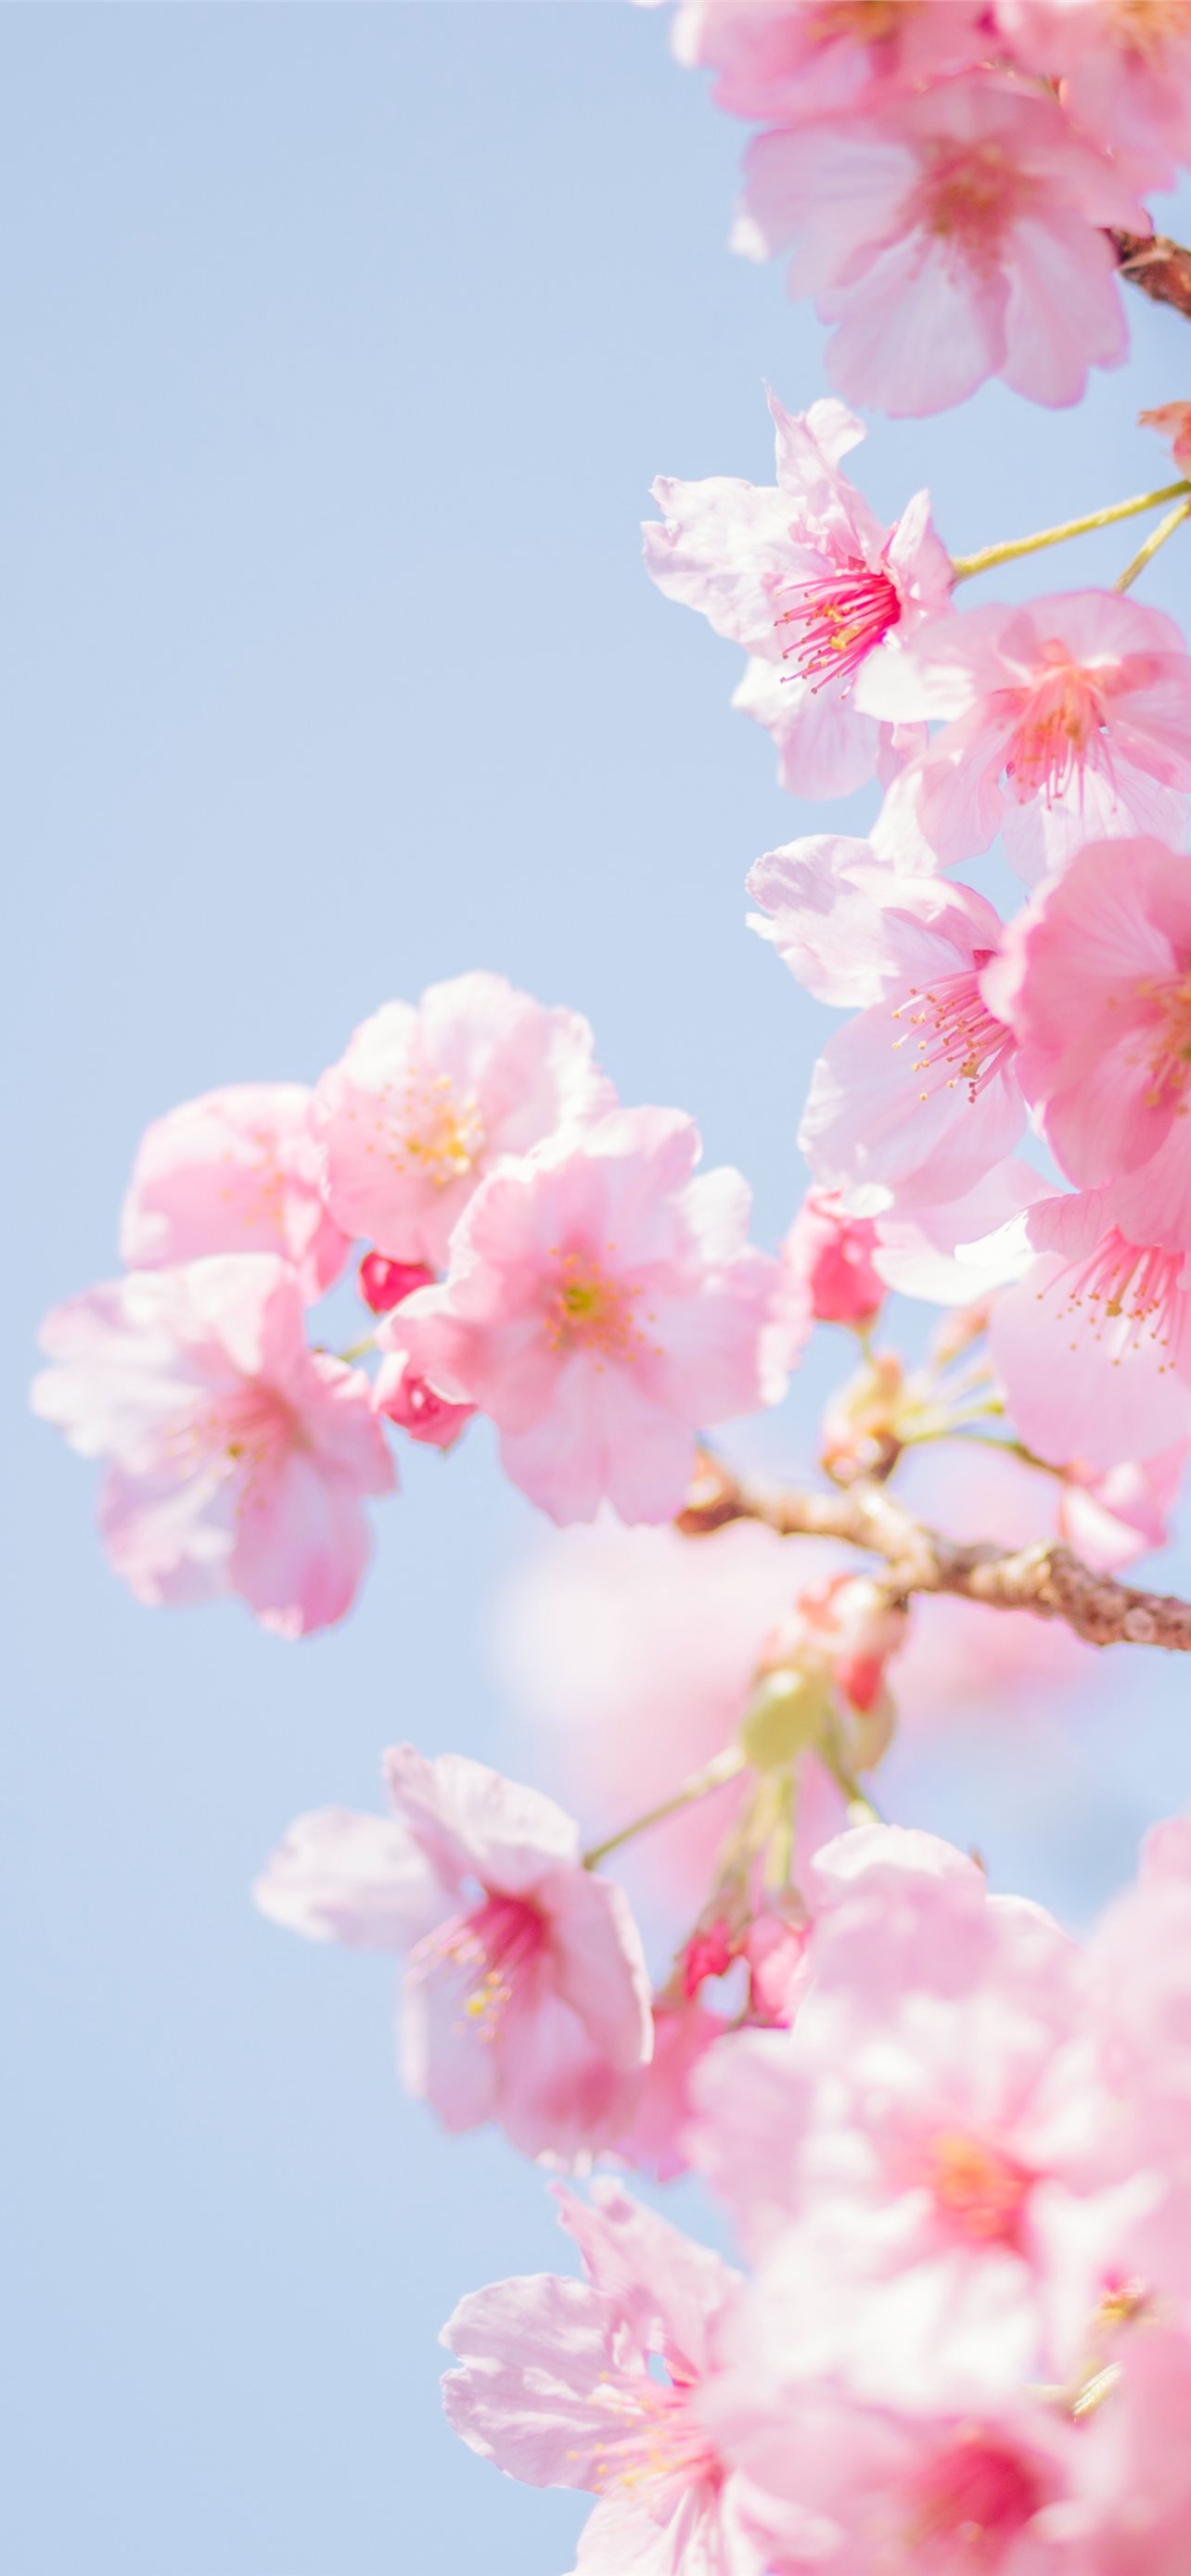 pink cherry blossom in close up photography iPhone Wallpaper Free Download